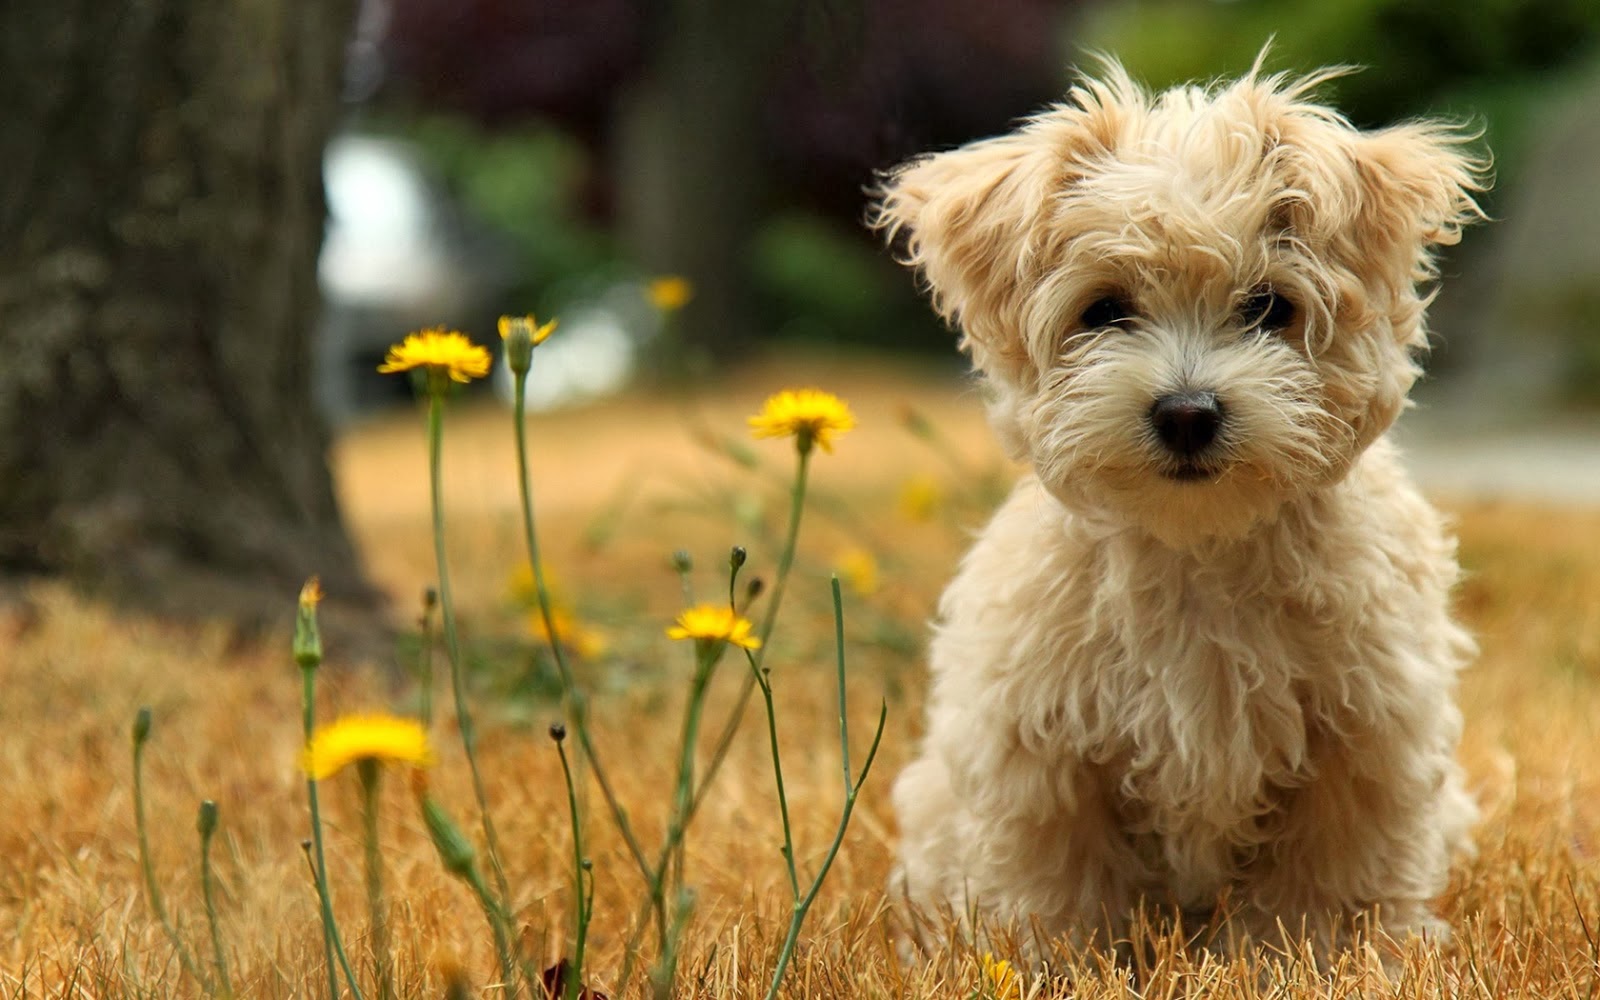 Free HD Wallpapers: Cute puppies wallpapers